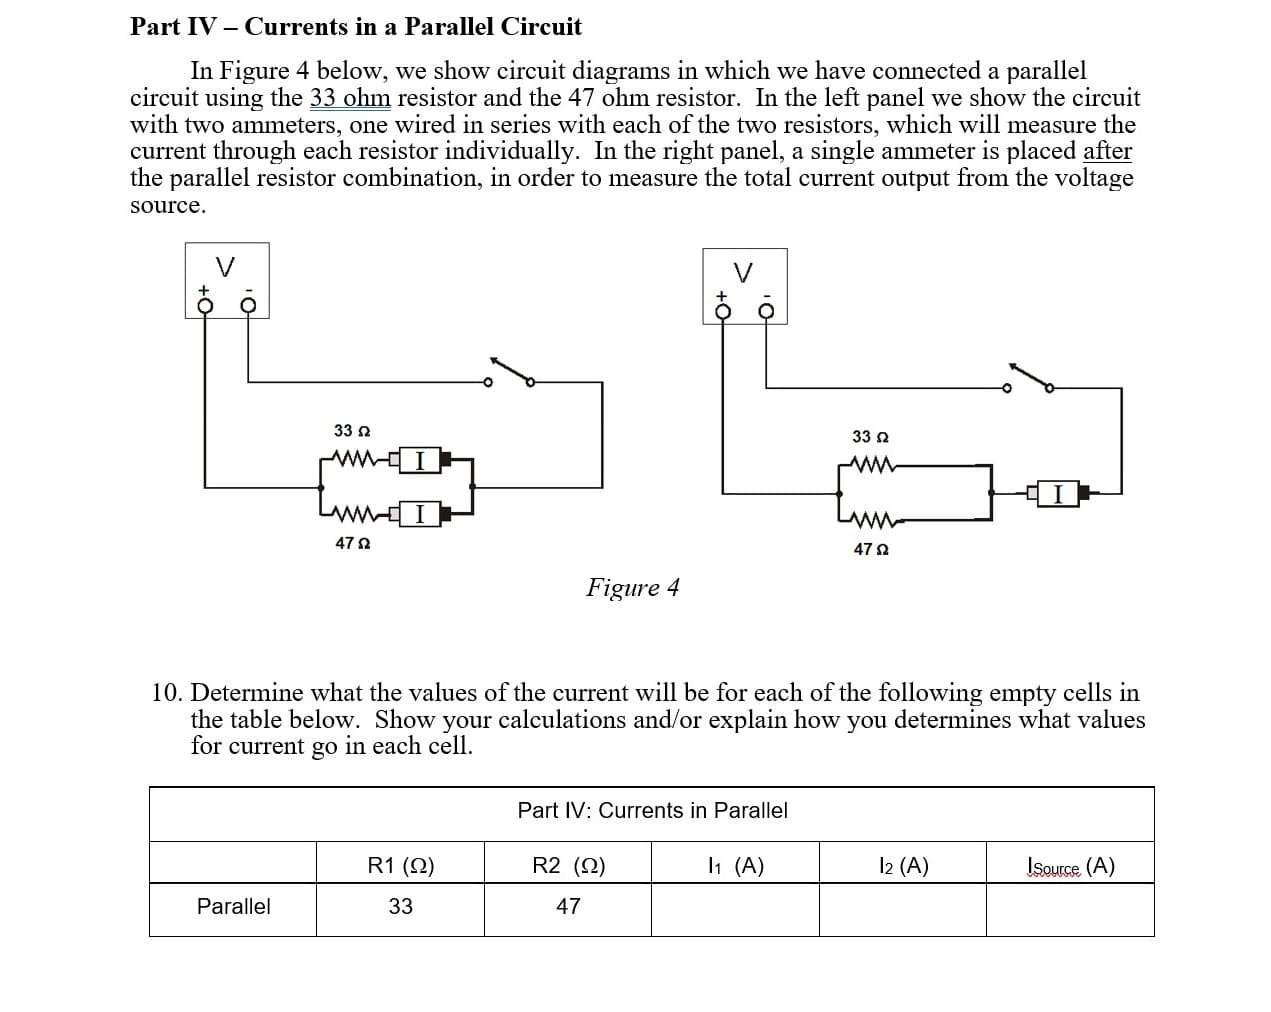 Part IV – Currents in a Parallel Circuit
In Figure 4 below, we show circuit diagrams in which we have connected a parallel
circuit using the 33 ohm resistor and the 47 ohm resistor. In the left panel we show the circuit
with two ammeters, one wired in series with each of the two resistors, which will measure the
current through each resistor individually. In the right panel, a single ammeter is placed after
the parallel resistor combination, in order to measure the total current output from the voltage
source.
